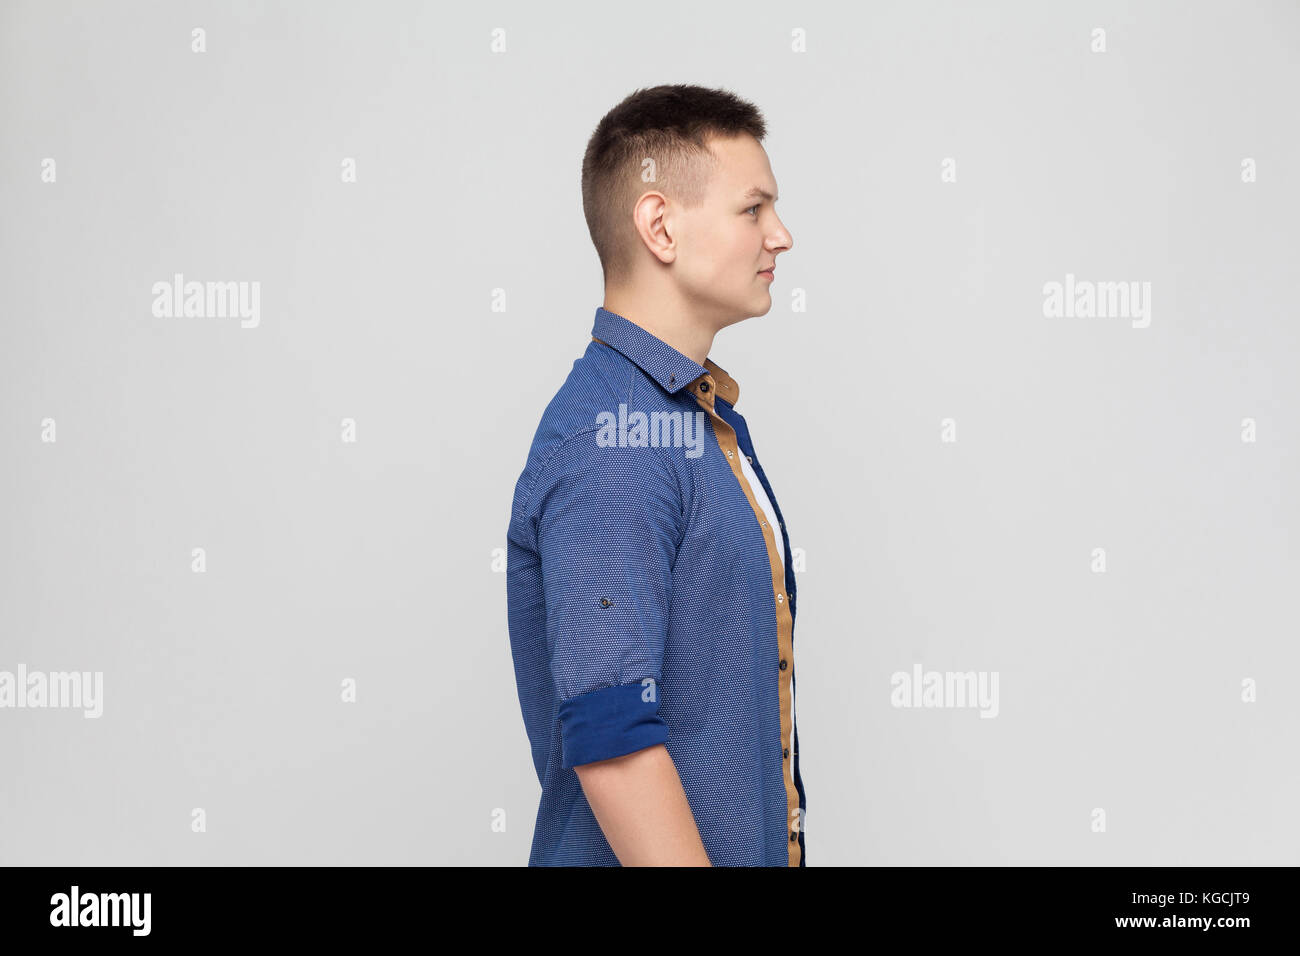 Profile young boy. Standing near gray wall Stock Photo